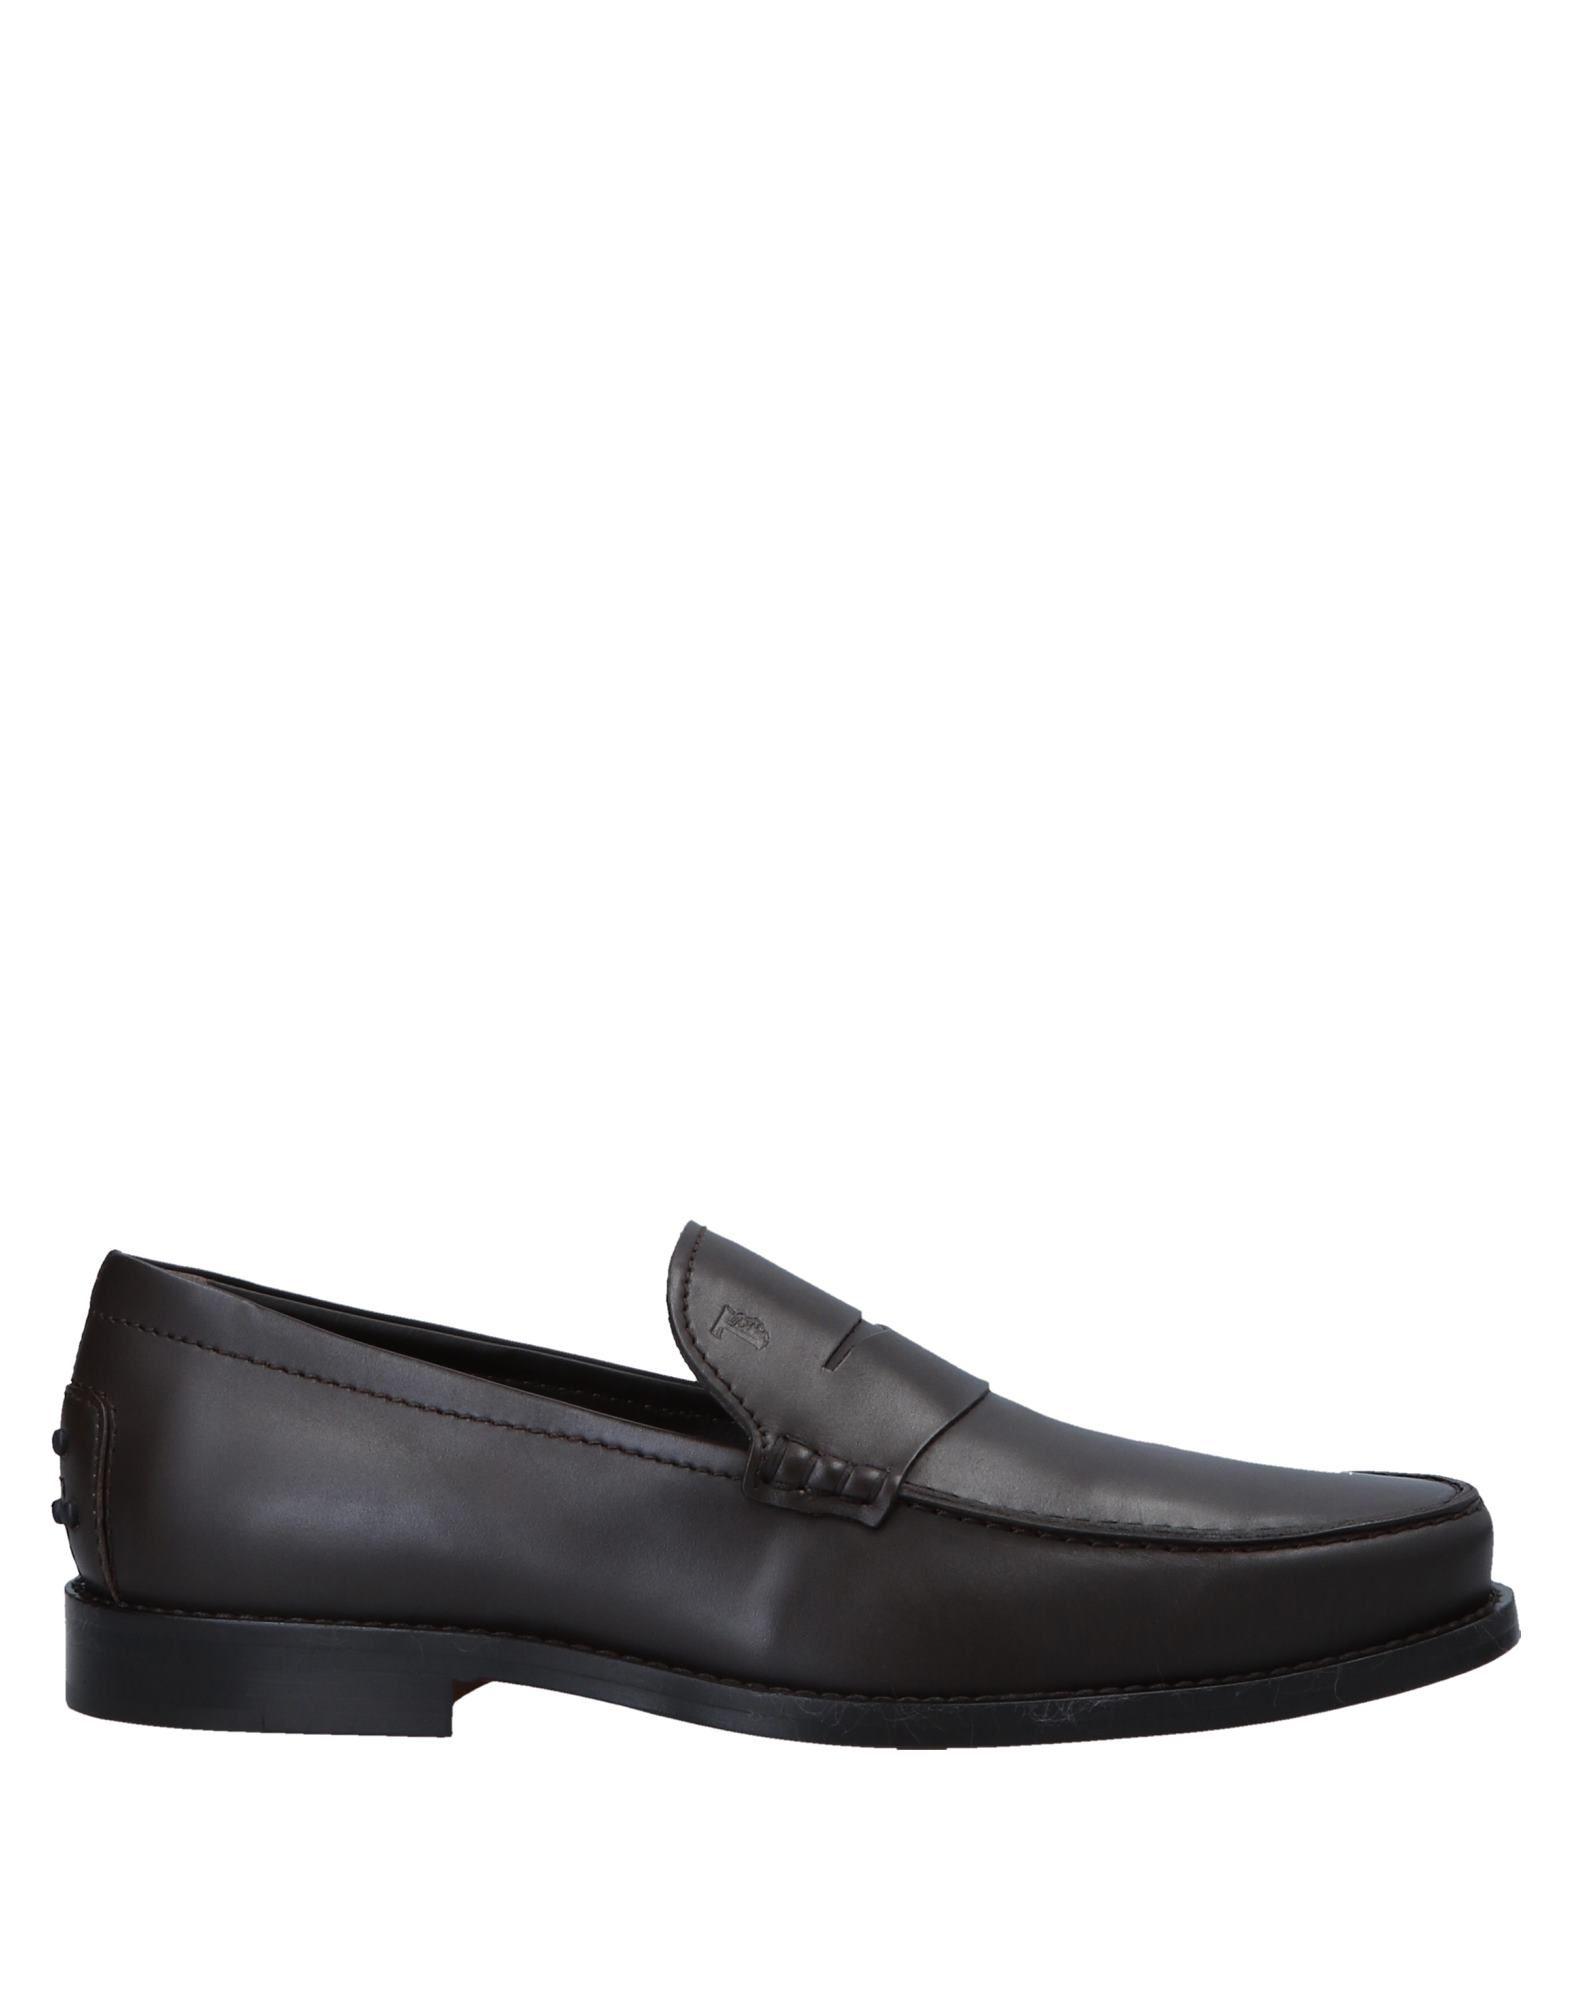 Tod's Leather Loafer in Dark Brown (Brown) for Men - Lyst